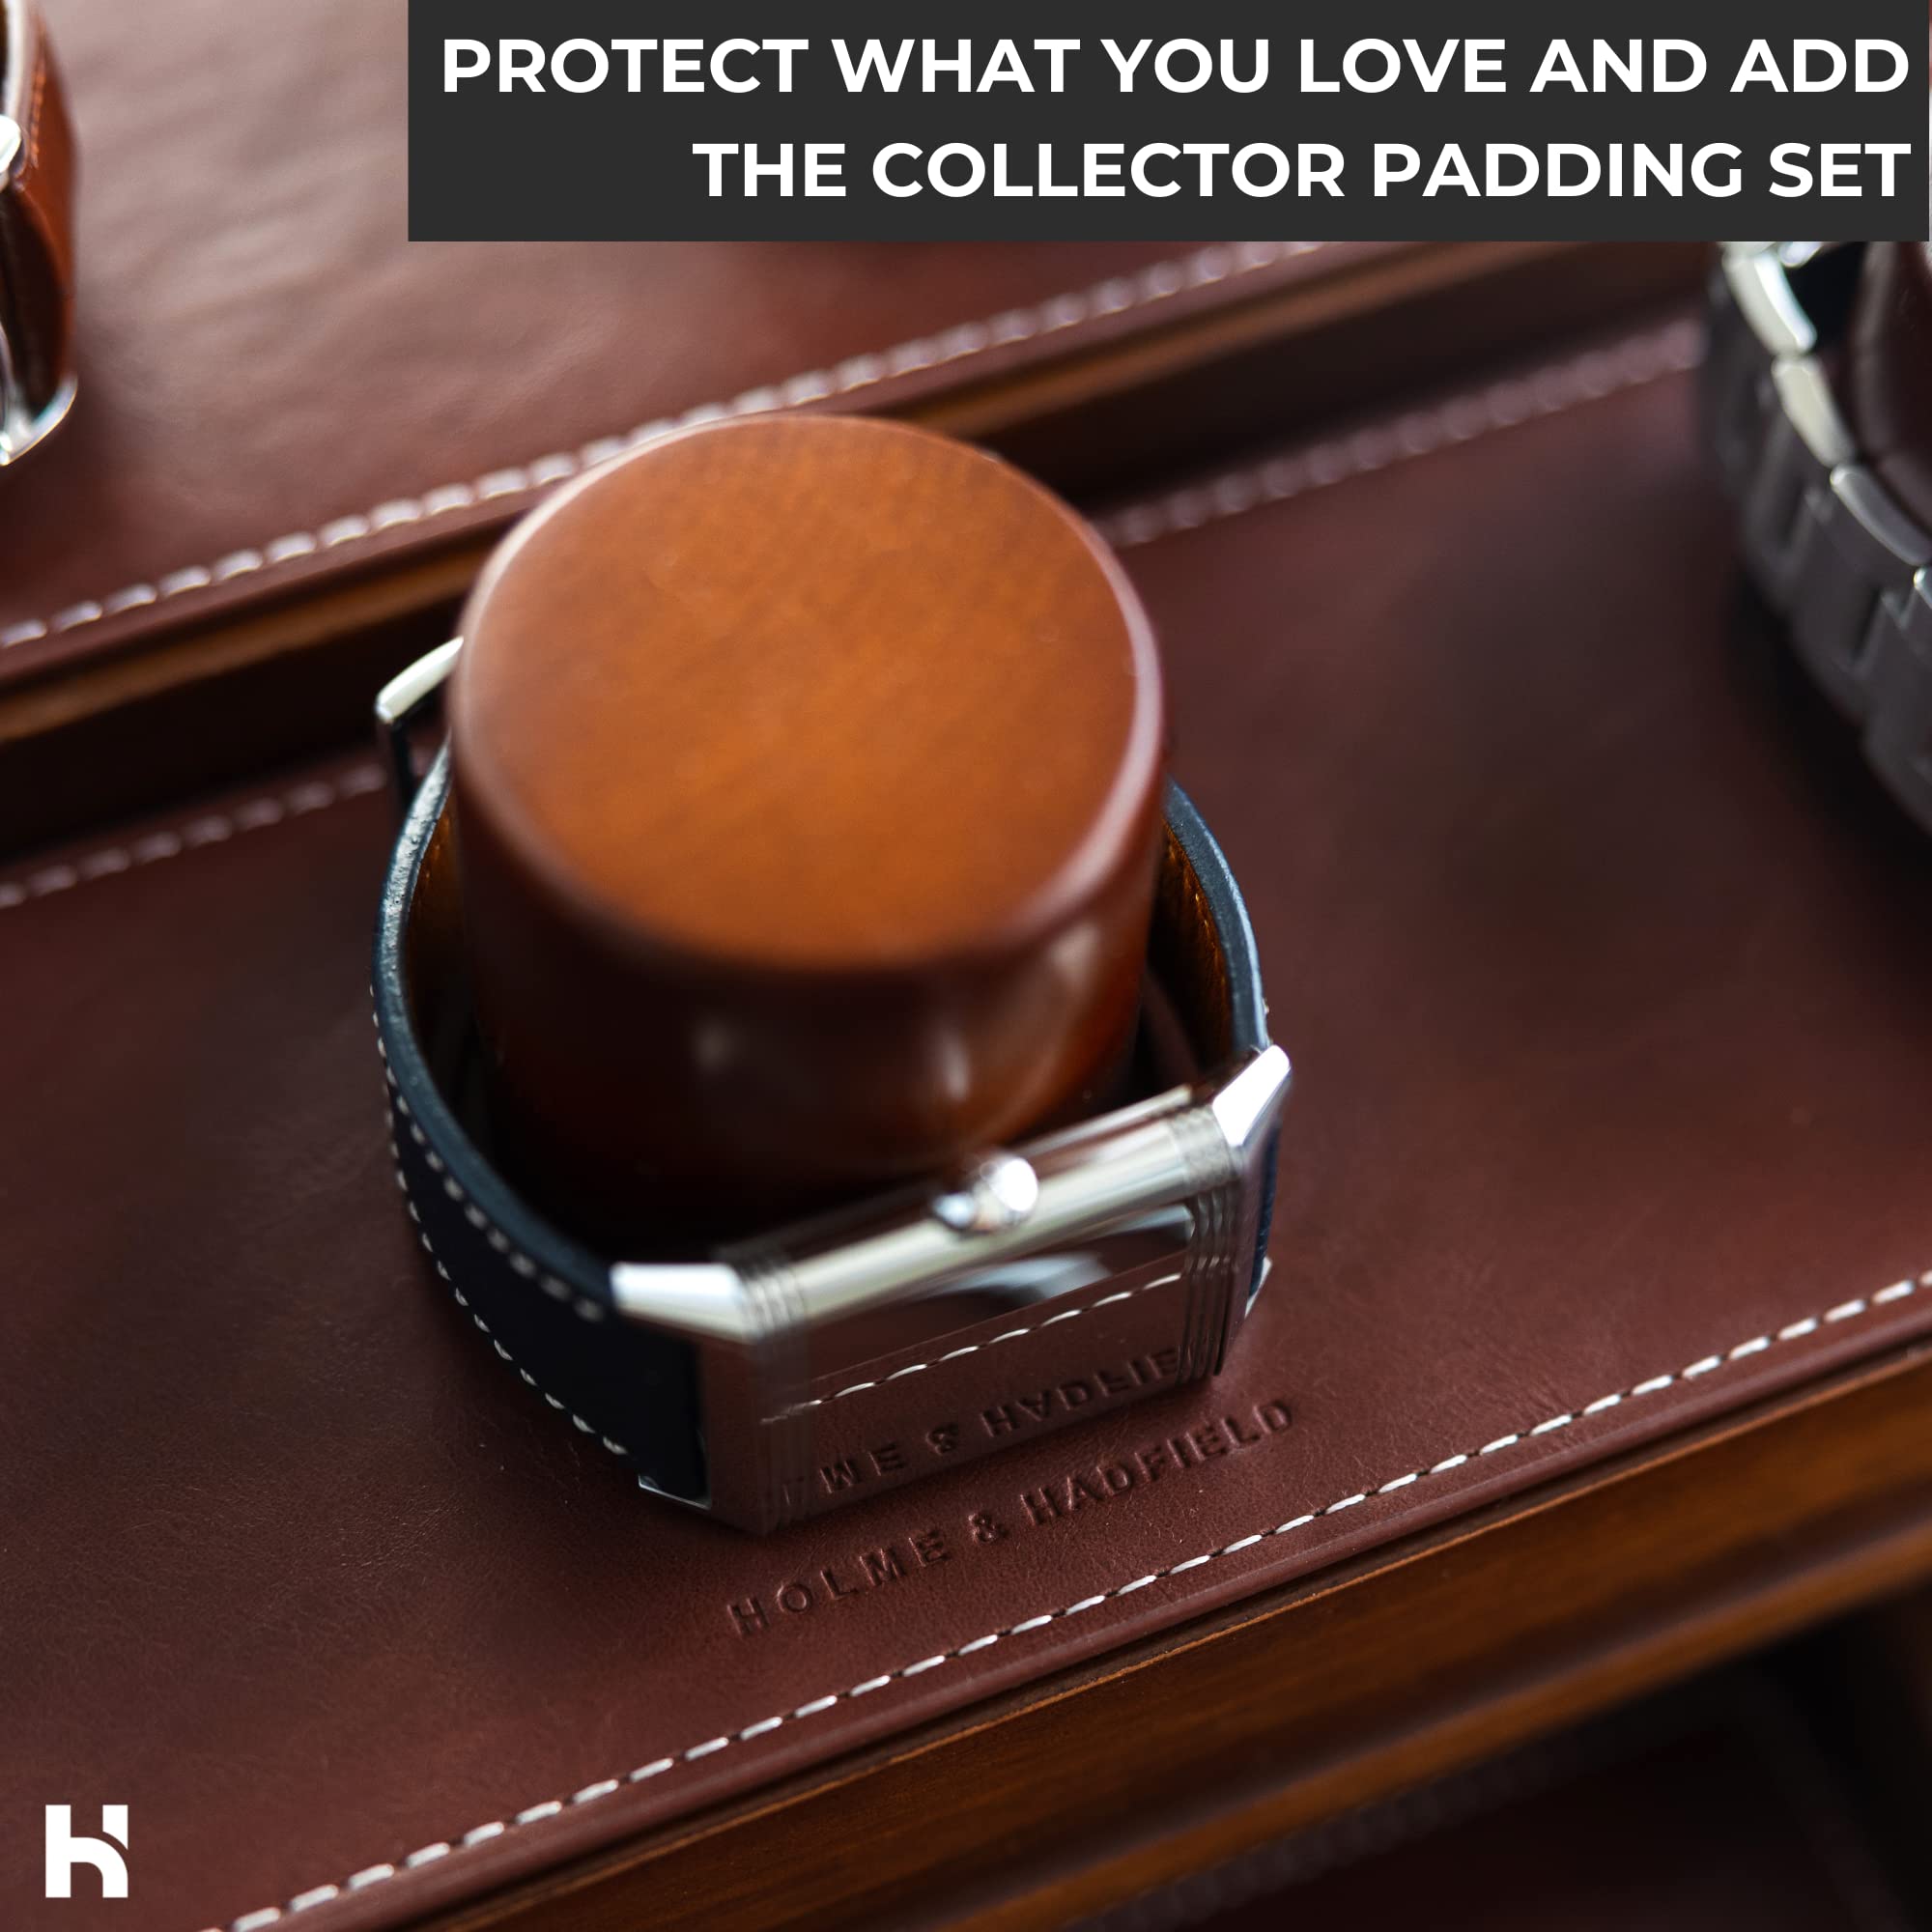 Holme & Hadfield The Collector with Vegan Leather Padding for Extra Protection and Luxurious Finish – Lifetime Assurance Included